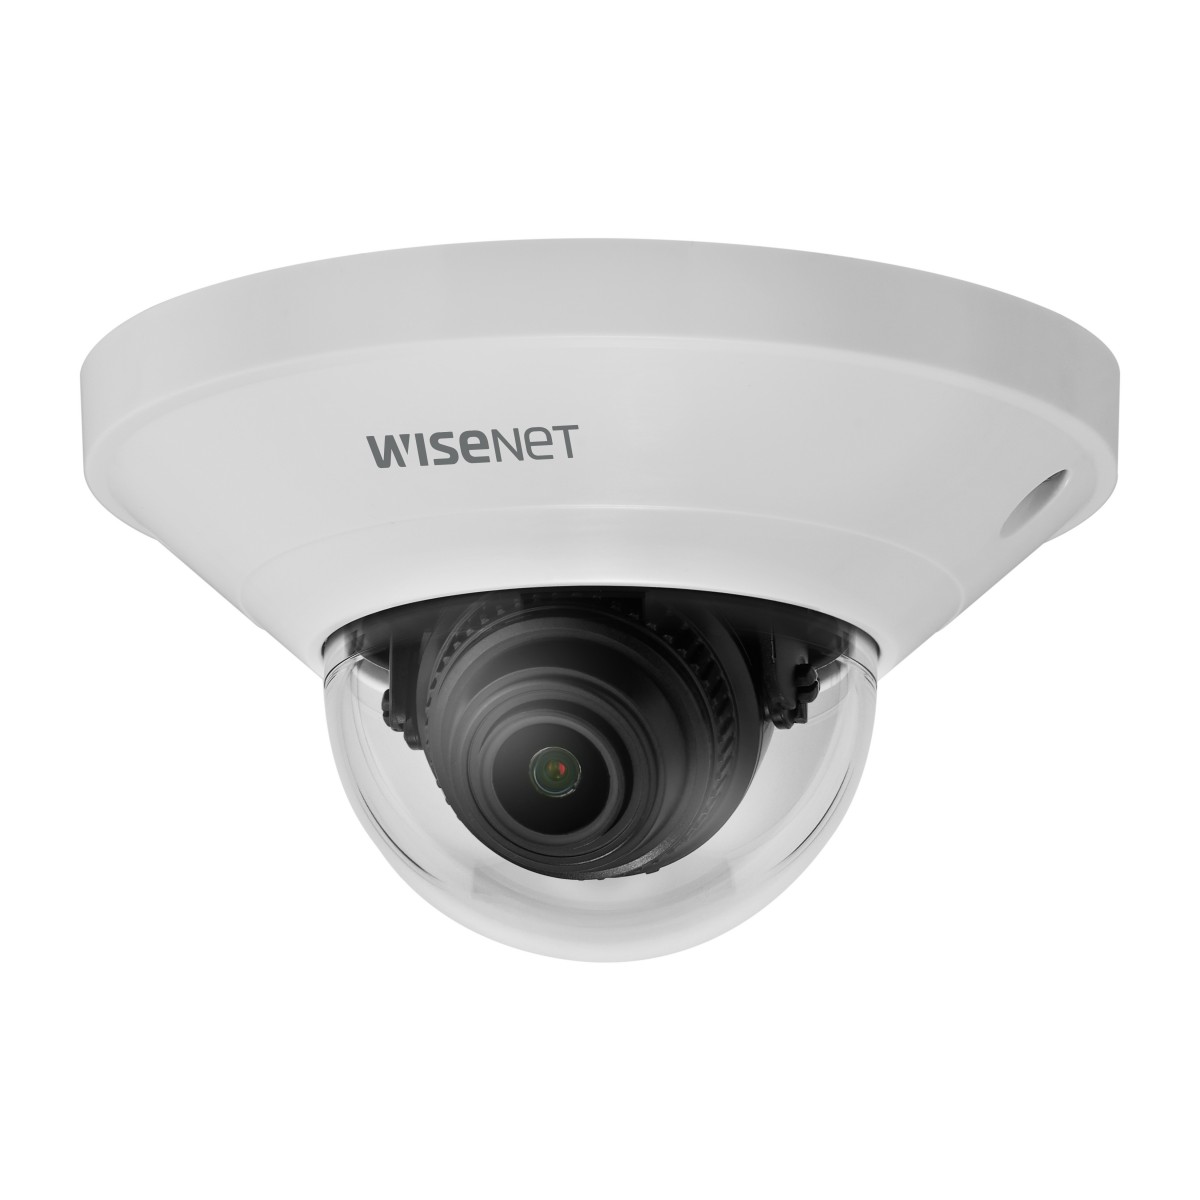 Hanwha Techwin Hanwha QND-8011 - IP security camera - Indoor & outdoor - Wired - Simplified Chinese - Traditional Chinese - Czec